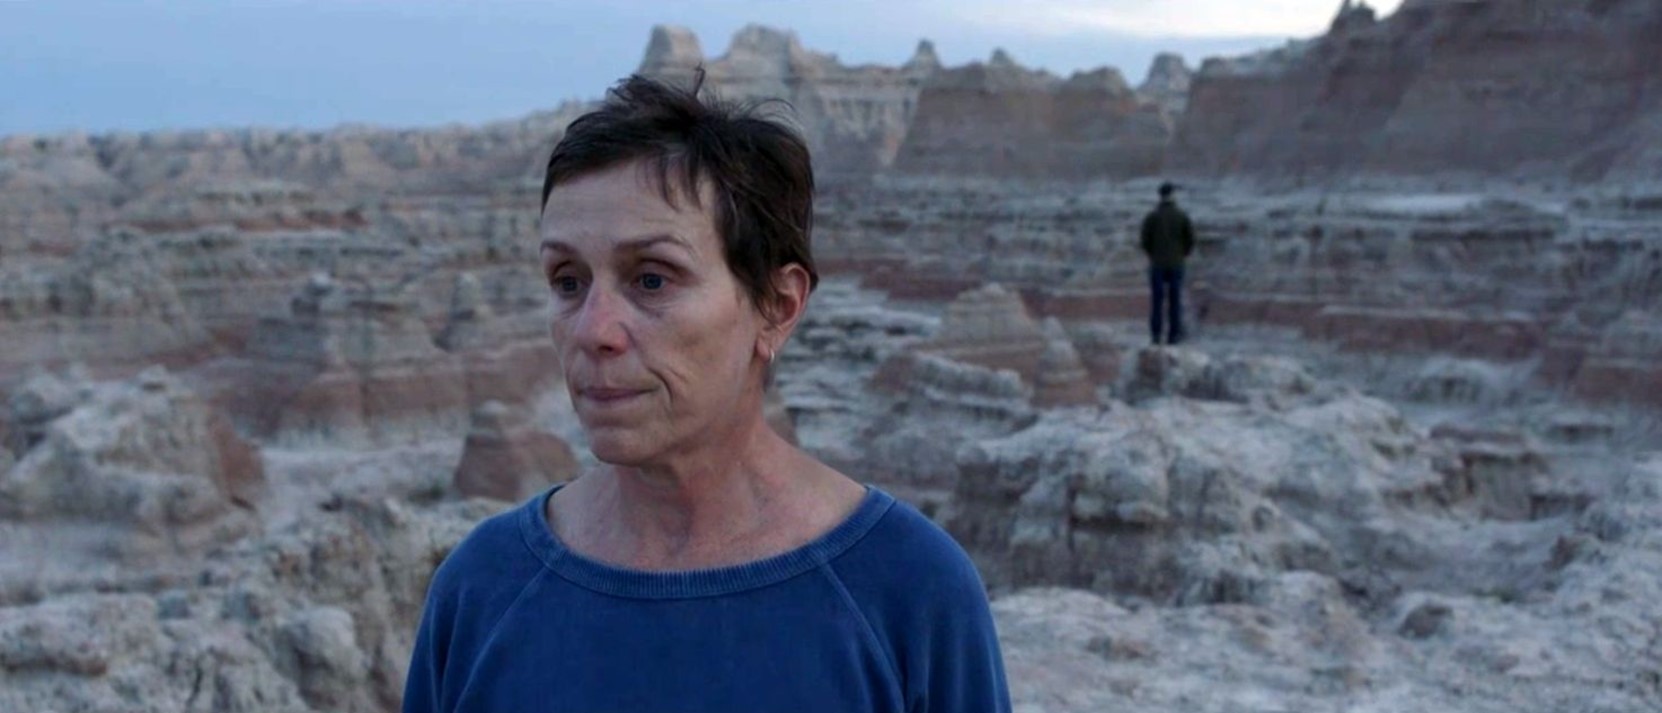 Frances McDormand stands in a rocky landscape in the southwestern USA, looking pensive